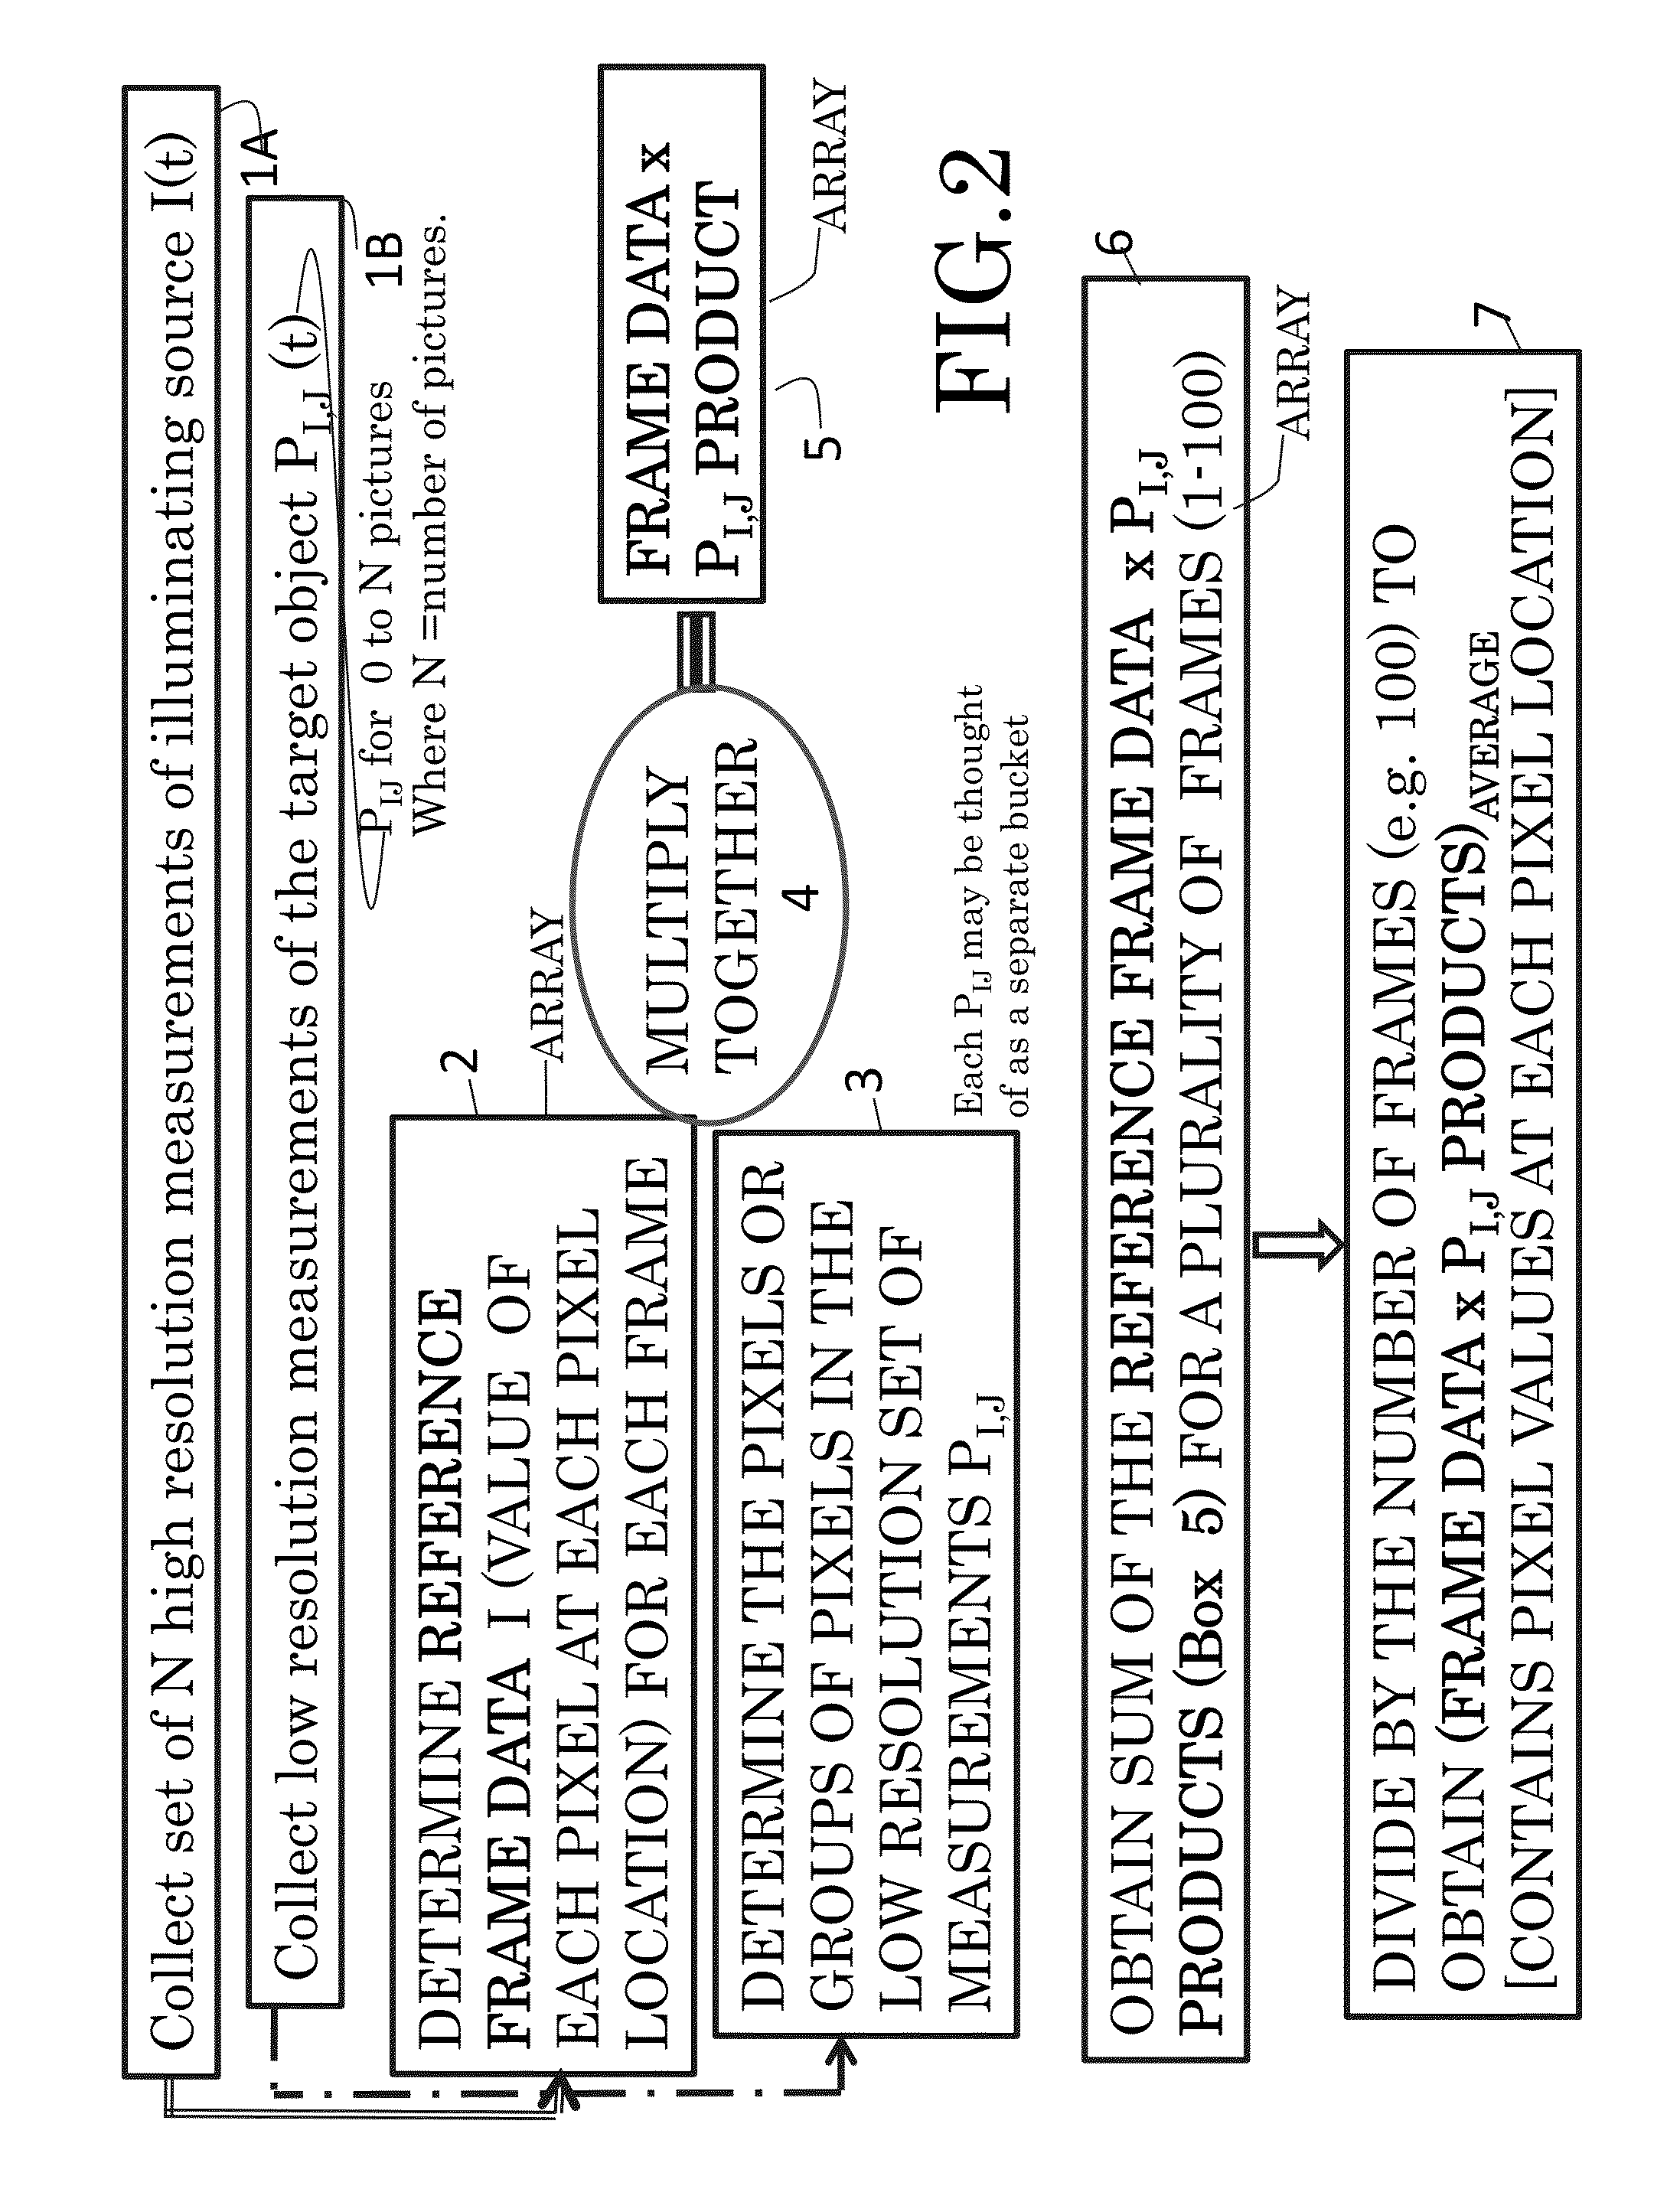 System and processor implemented method for improved image quality and enhancement based on quantum properties